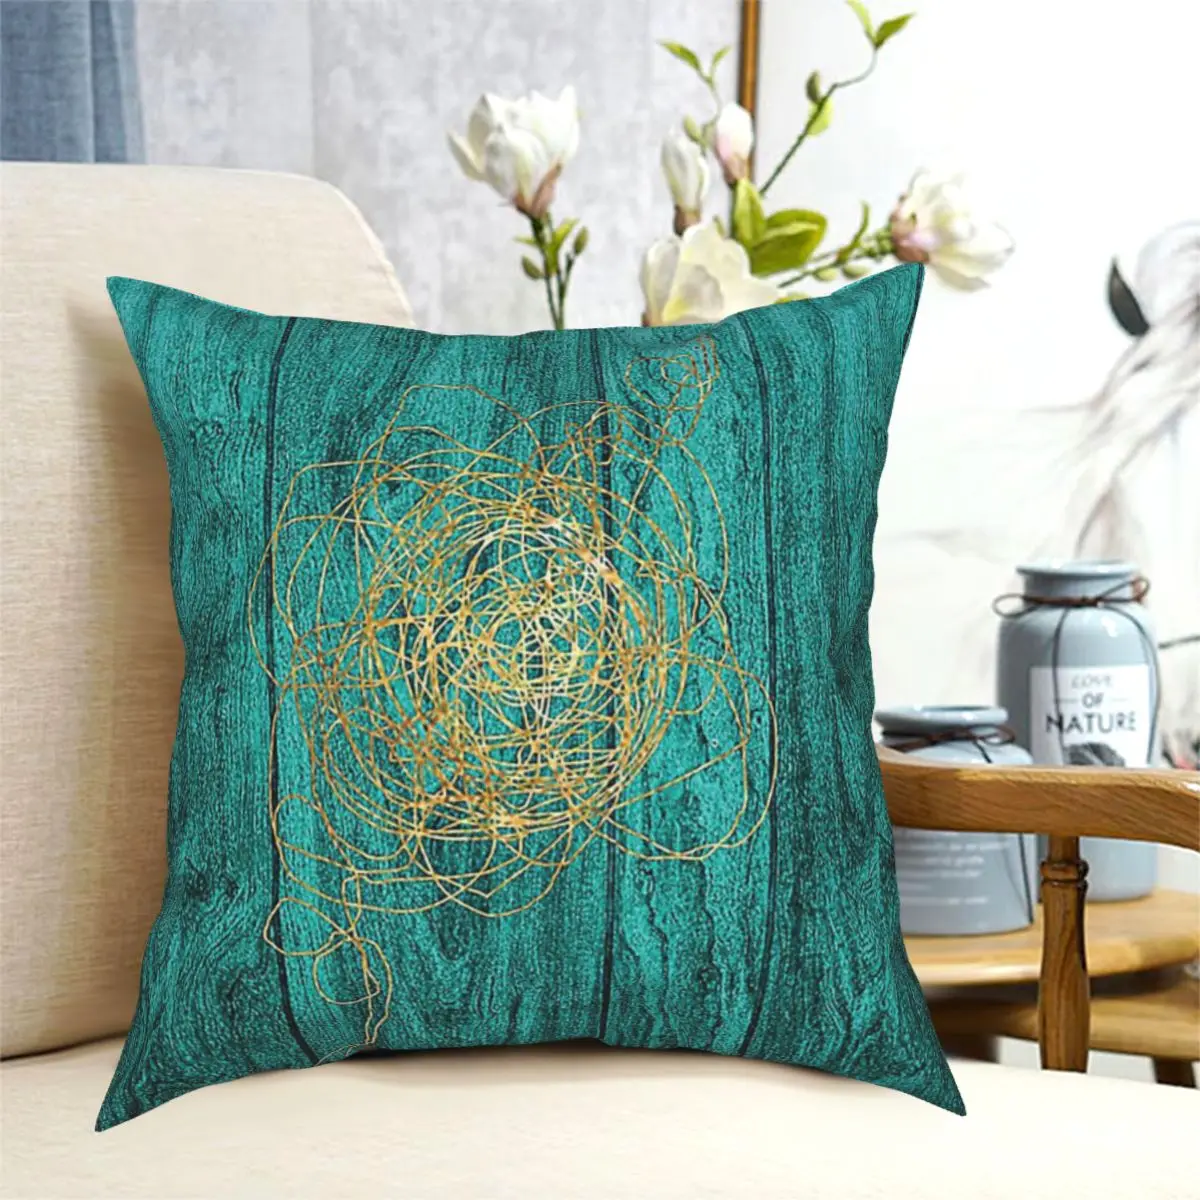 

Blue And Turquoise Teal Wood And Gold Pillow Cushion Cover Decorative Pillowcases Case Home Sofa Cushions 40x40,45x45cm